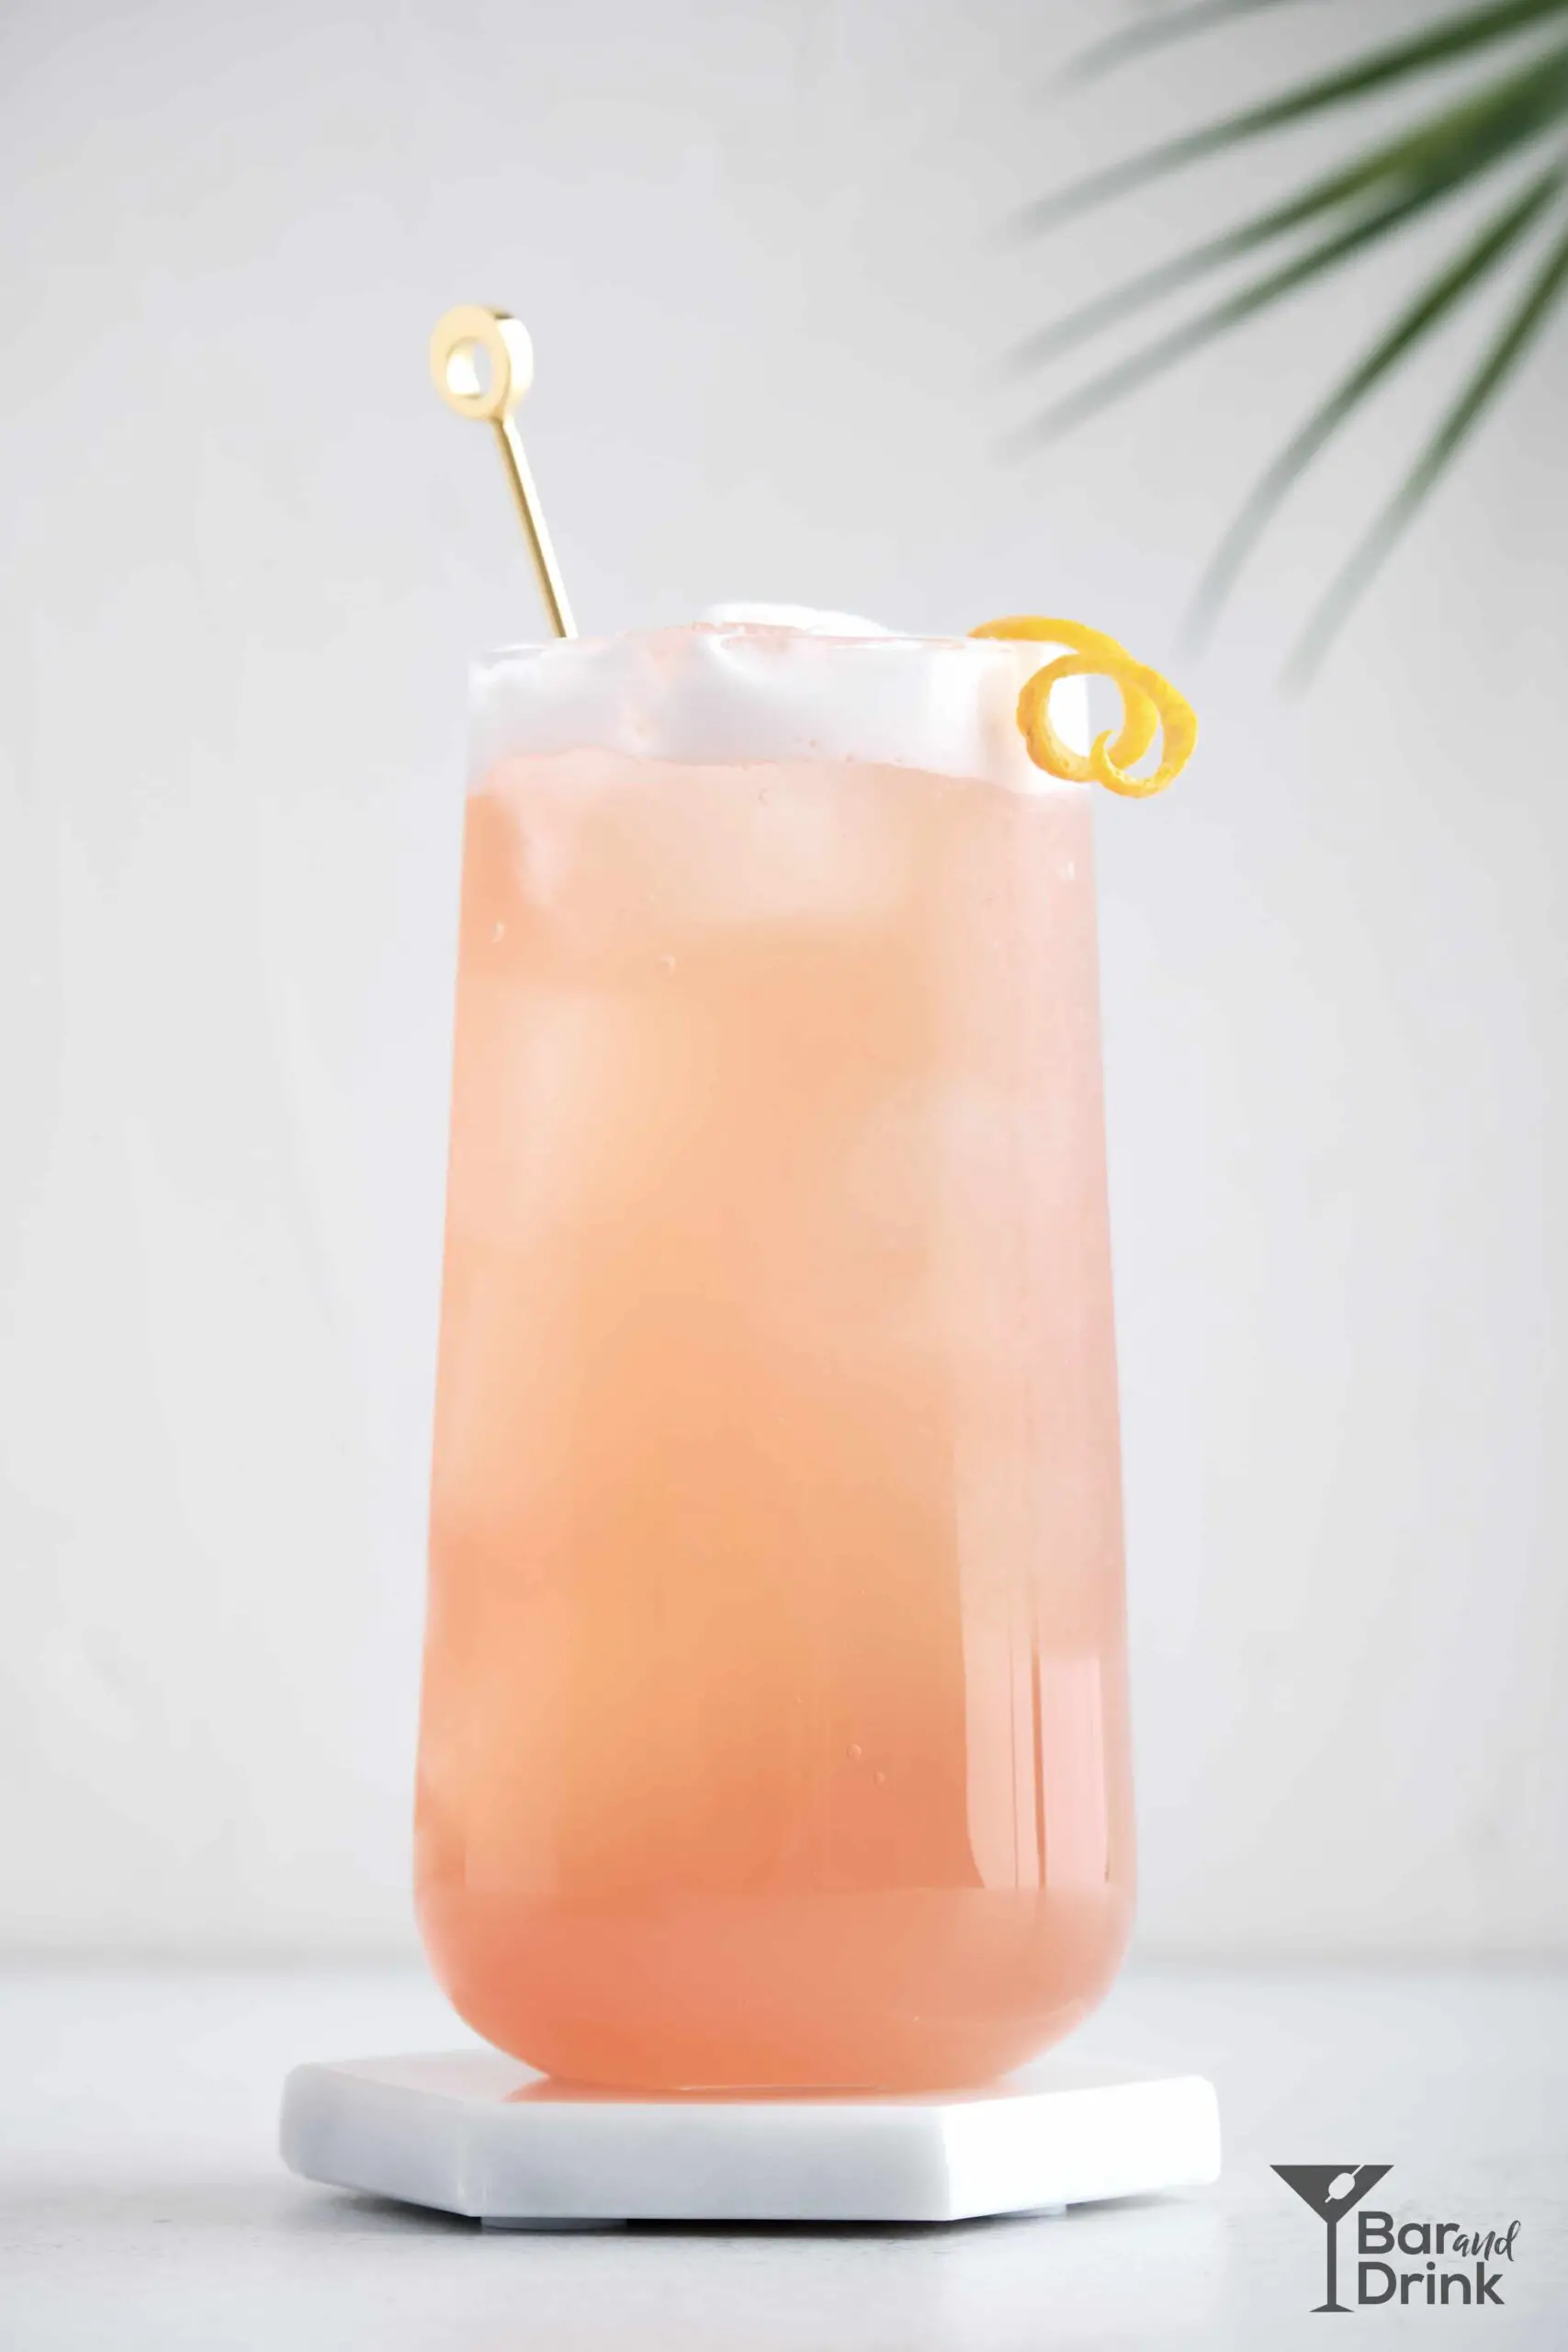 2. Panty Dropper Cocktail Variations